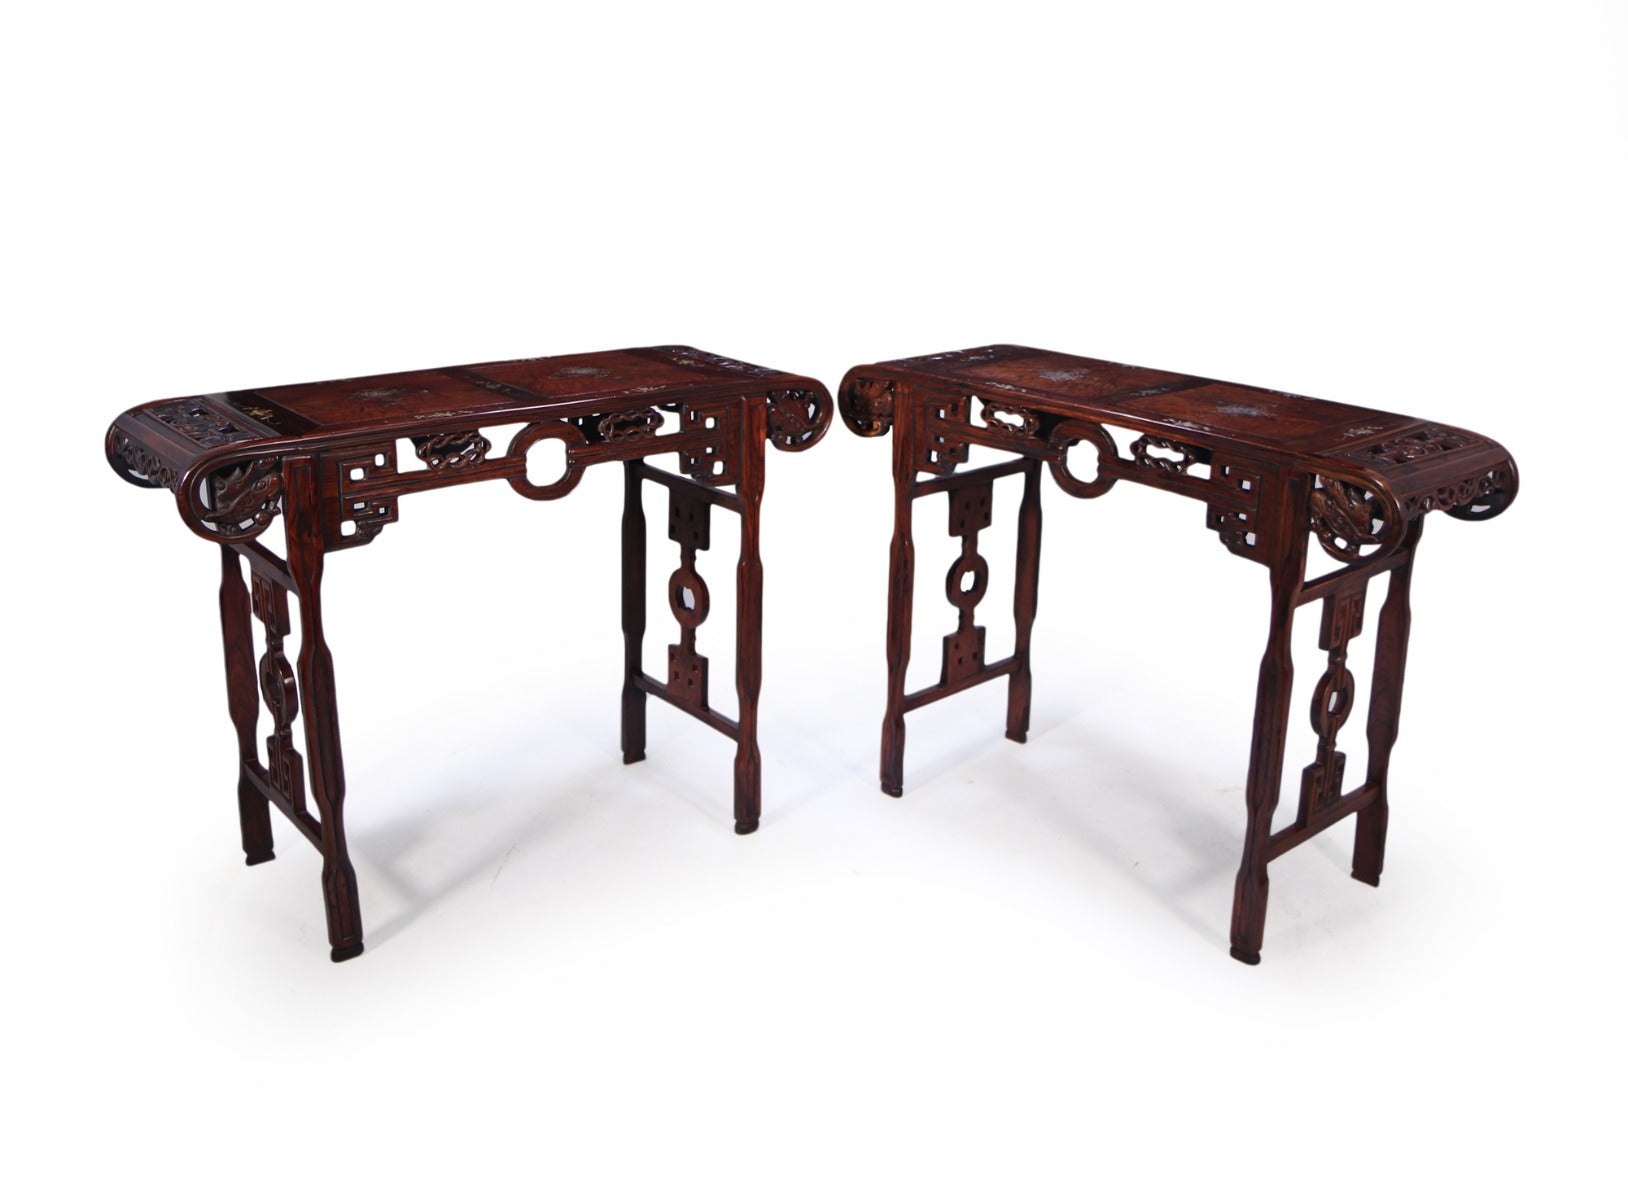 Pair of Chinese Hardwood Console Tables – The Furniture Rooms